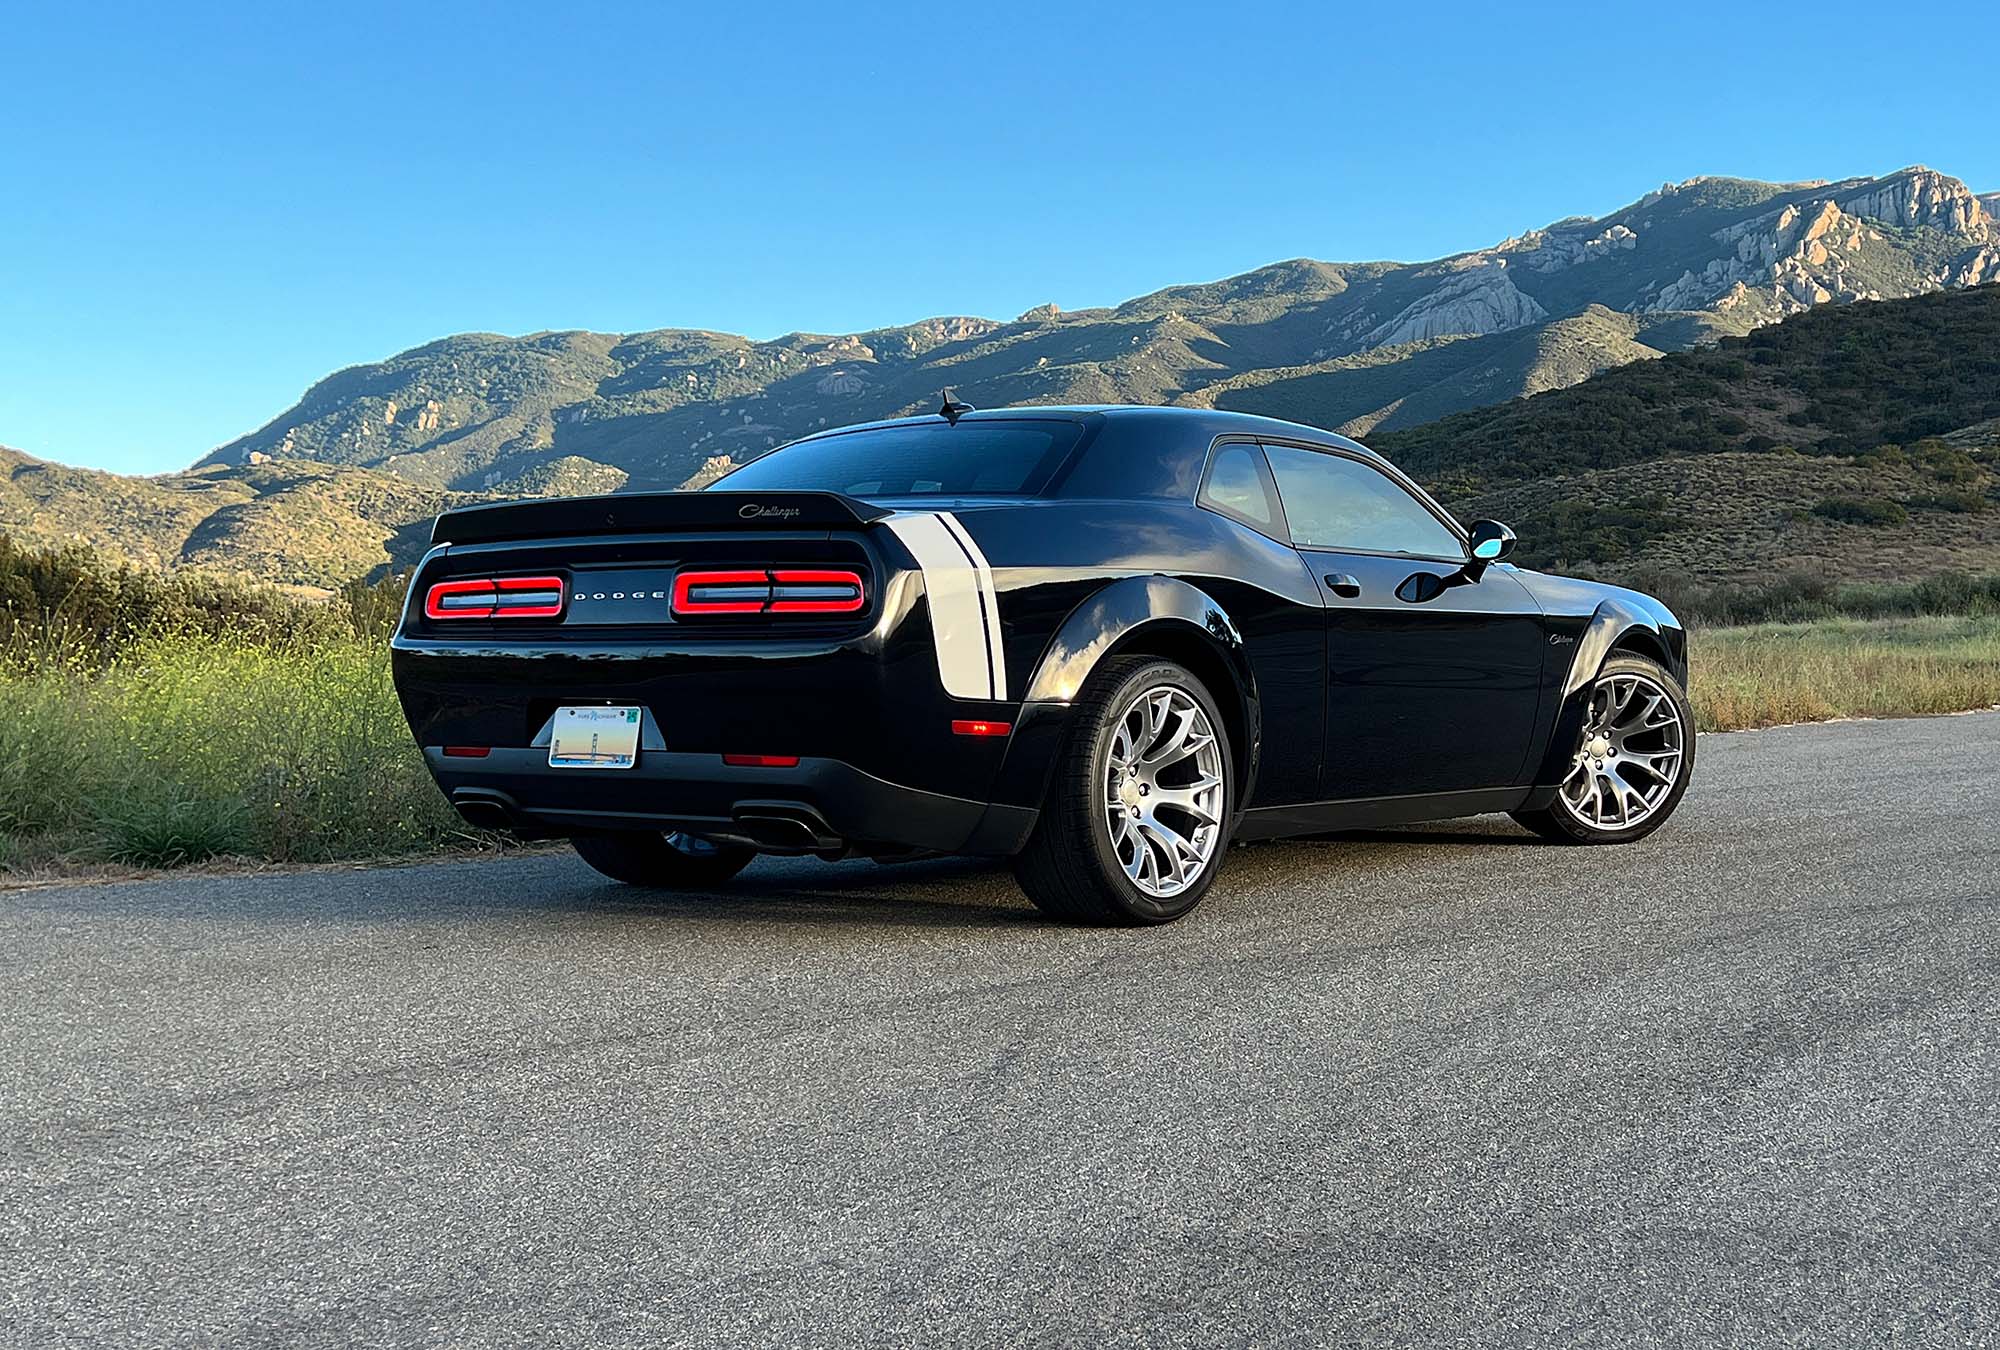 2023 Dodge Challenger Black Ghost rear three-quarter view with mountains in the background.